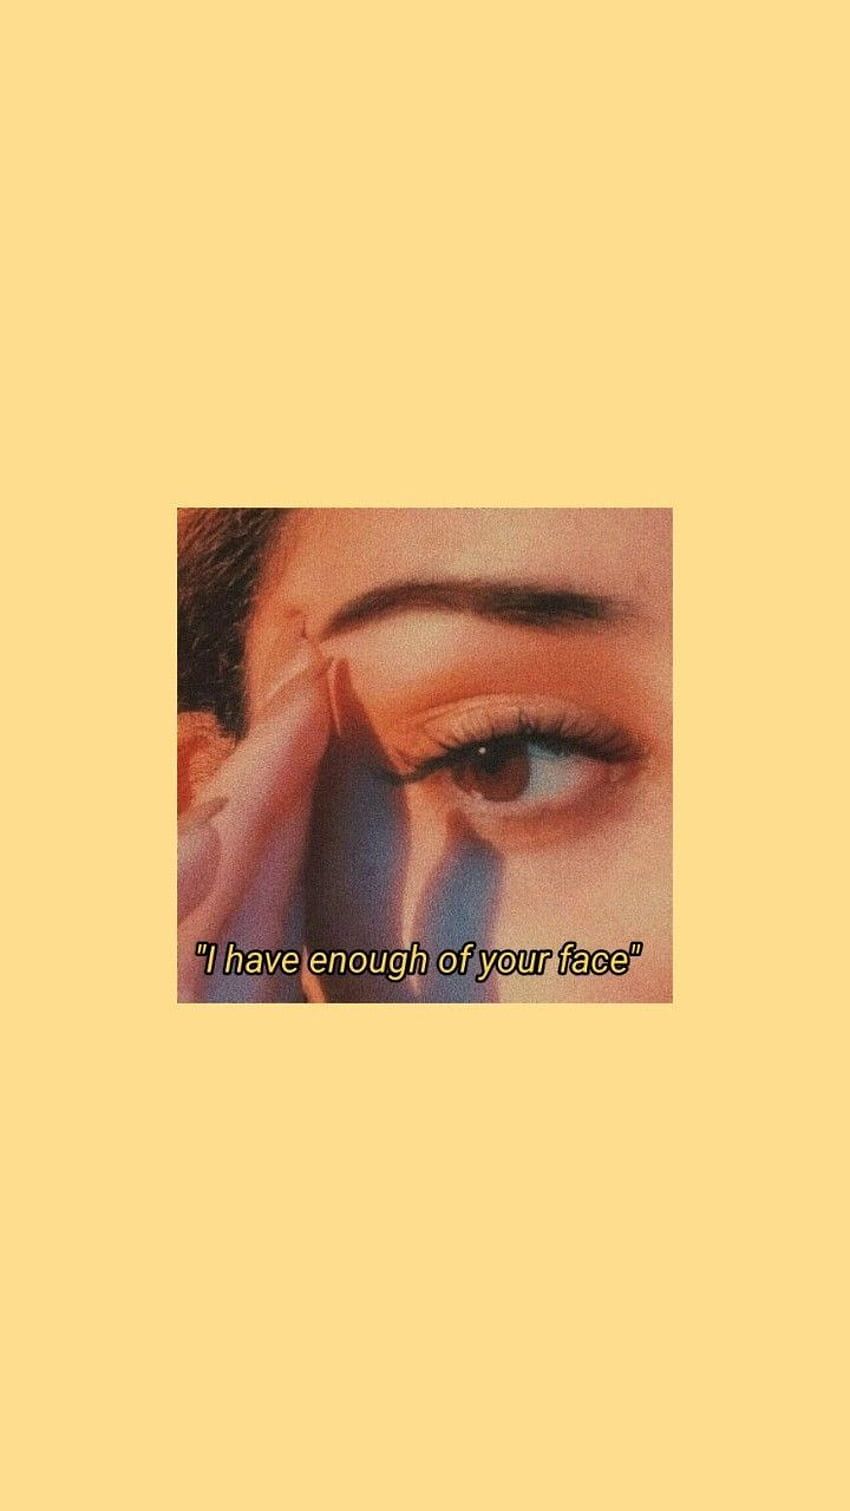 Aesthetic background of a woman crying with the caption 